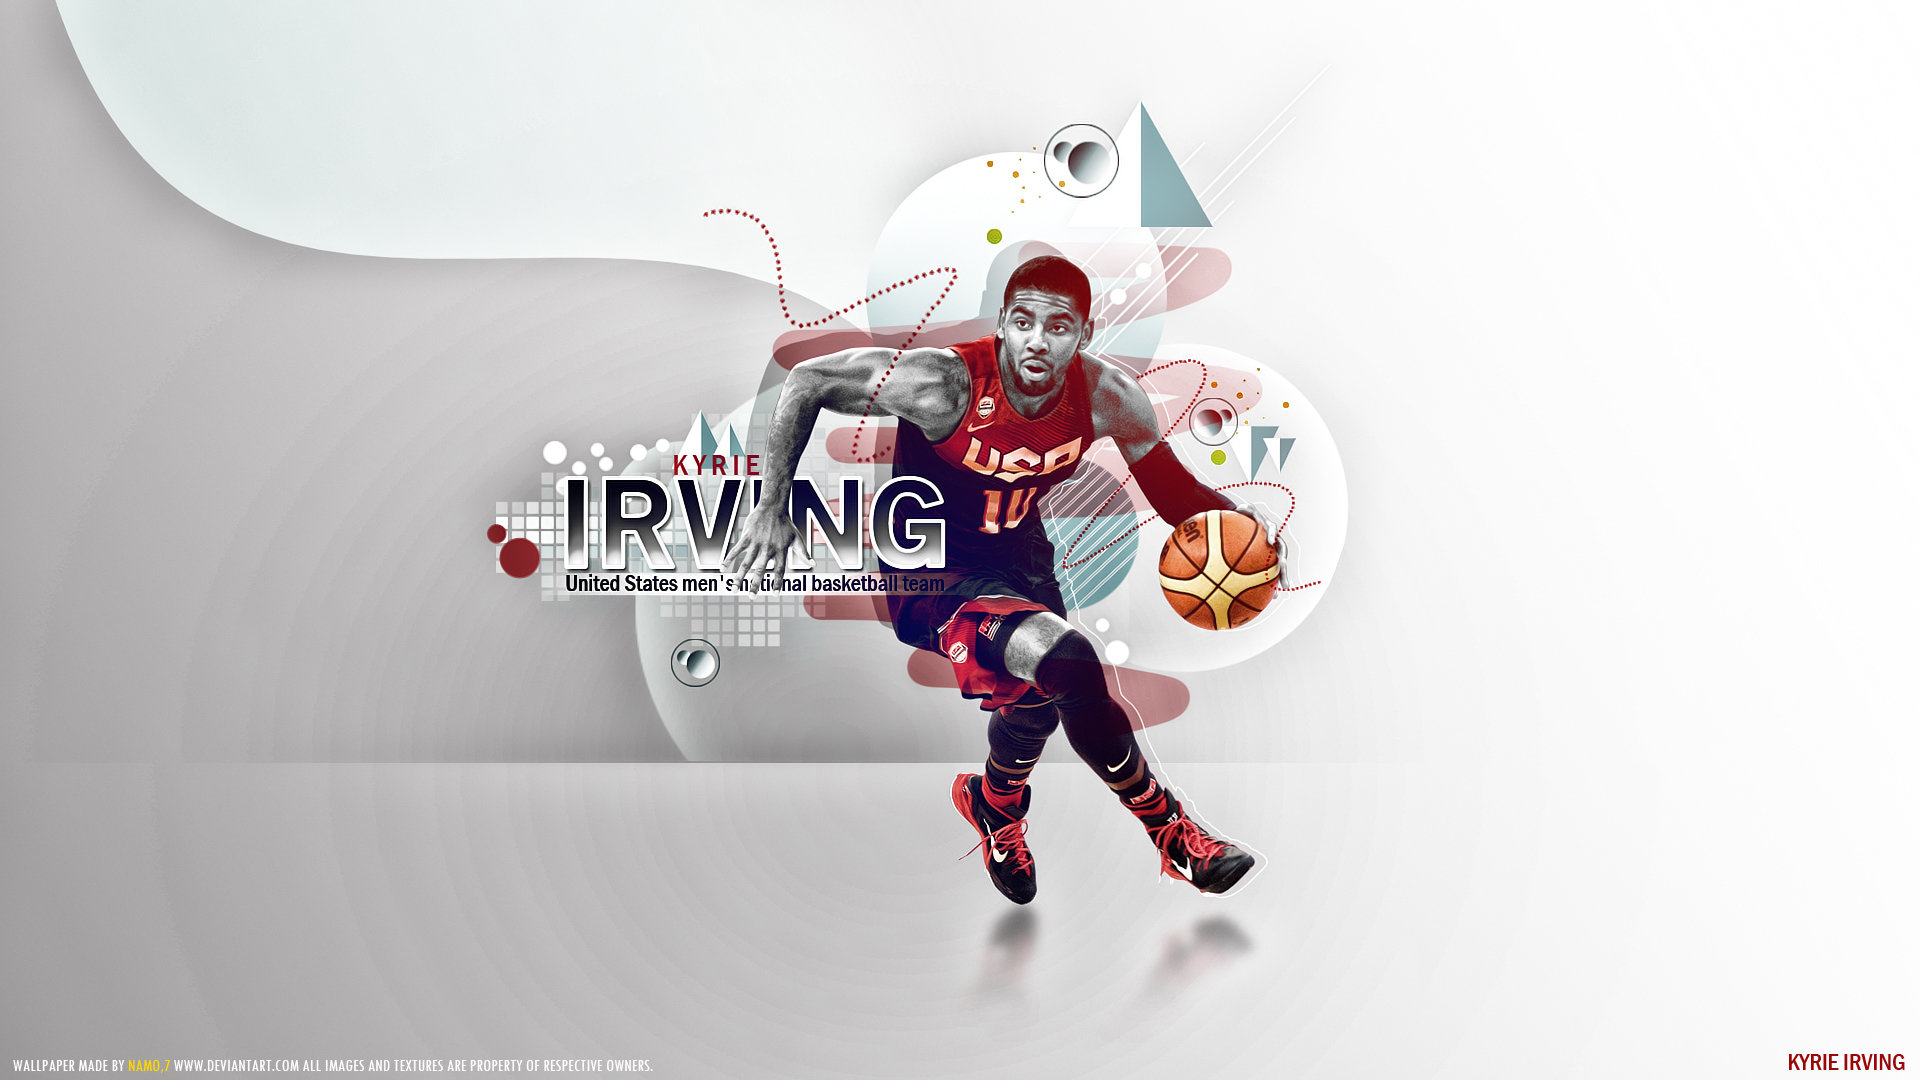 Kyrie Irving wallpapers 1920x1080 Full HD 1080p desktop backgrounds